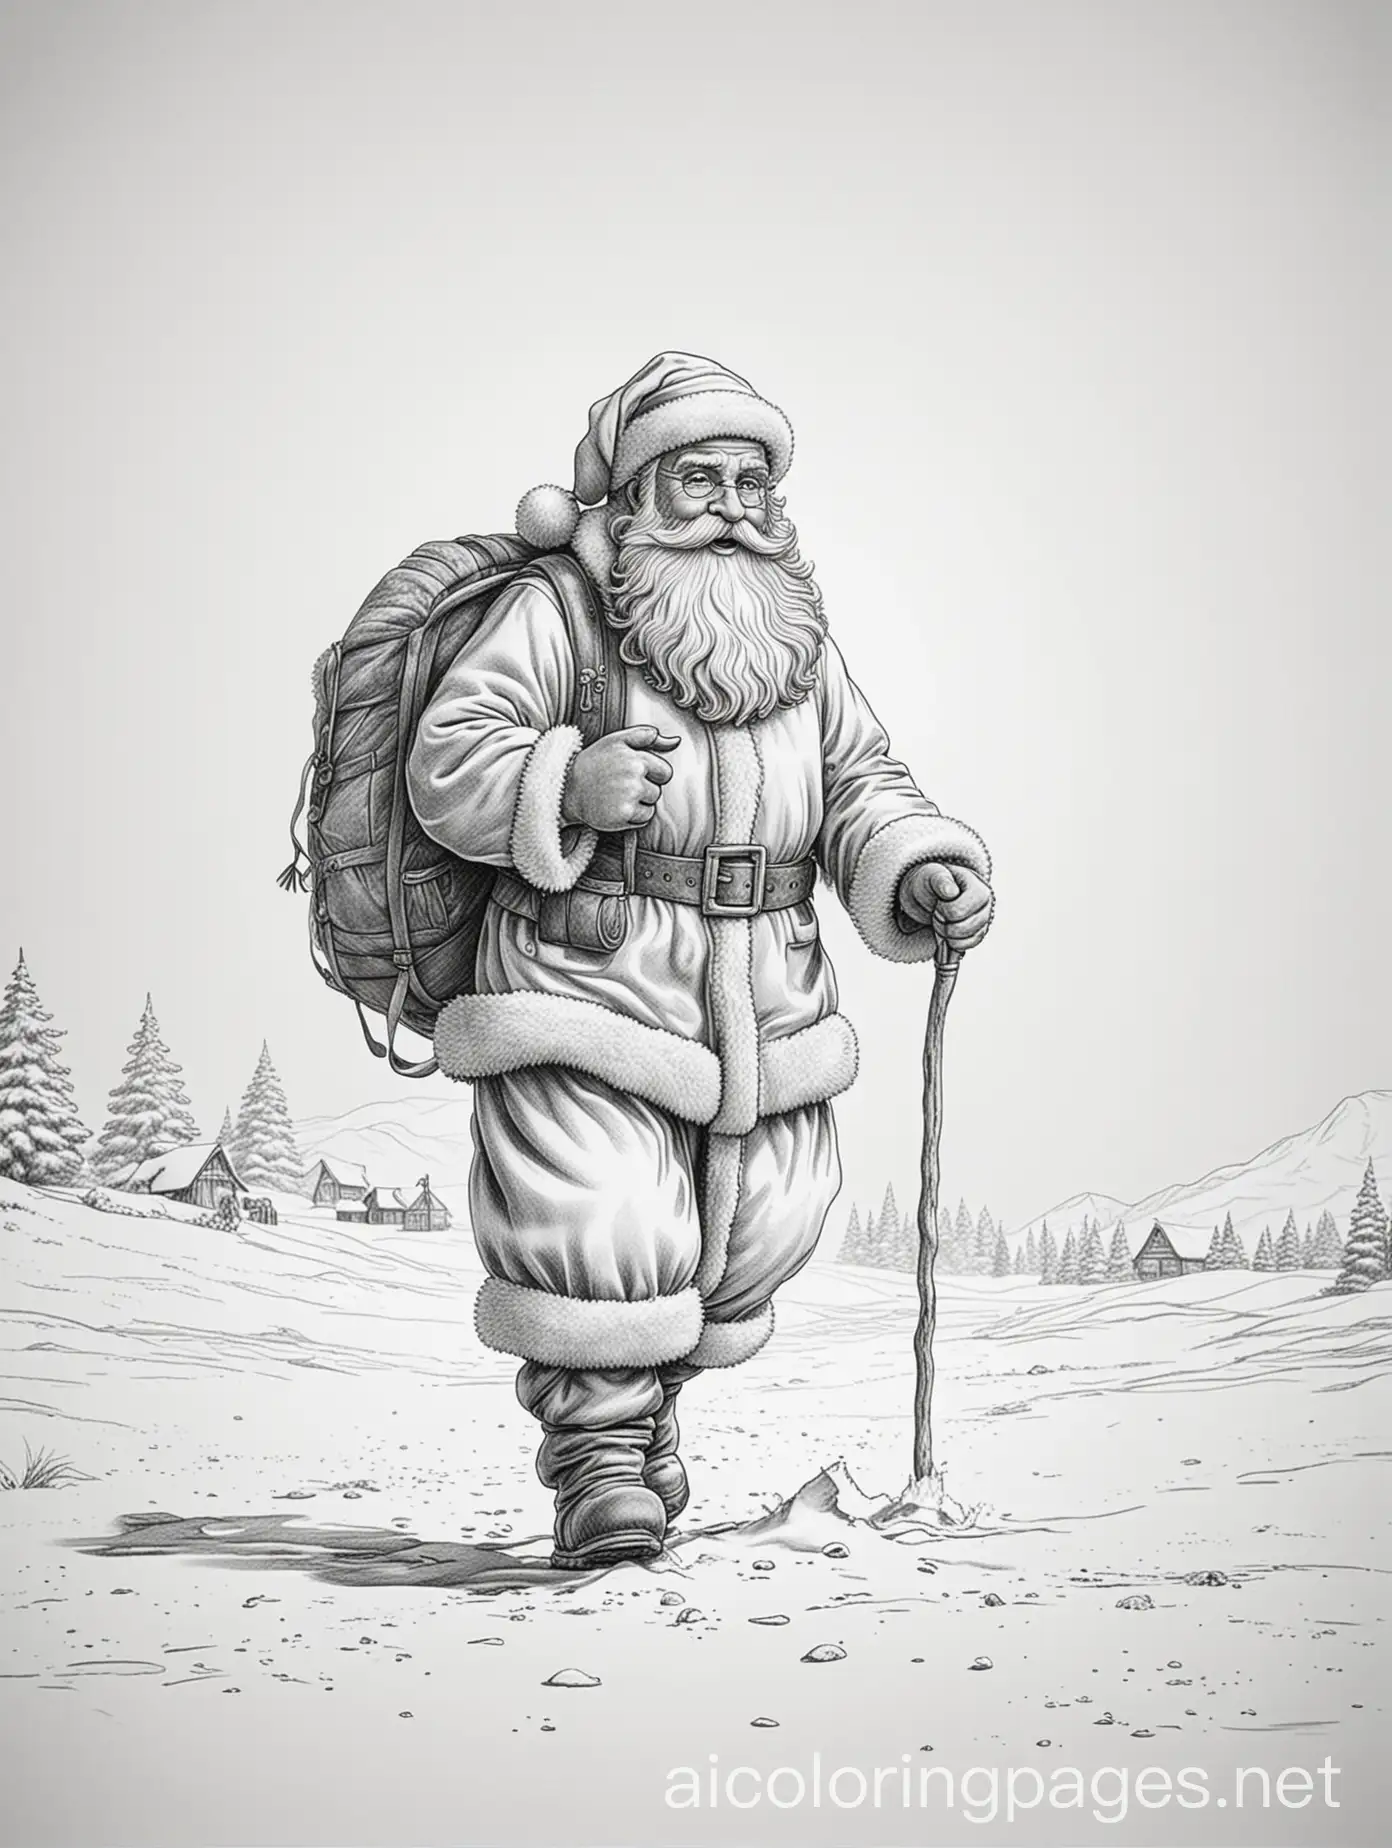 Santa claus walking in the snow at the north pole, Coloring Page, black and white, line art, white background, Simplicity, Ample White Space. The background of the coloring page is plain white to make it easy for young children to color within the lines. The outlines of all the subjects are easy to distinguish, making it simple for kids to color without too much difficulty